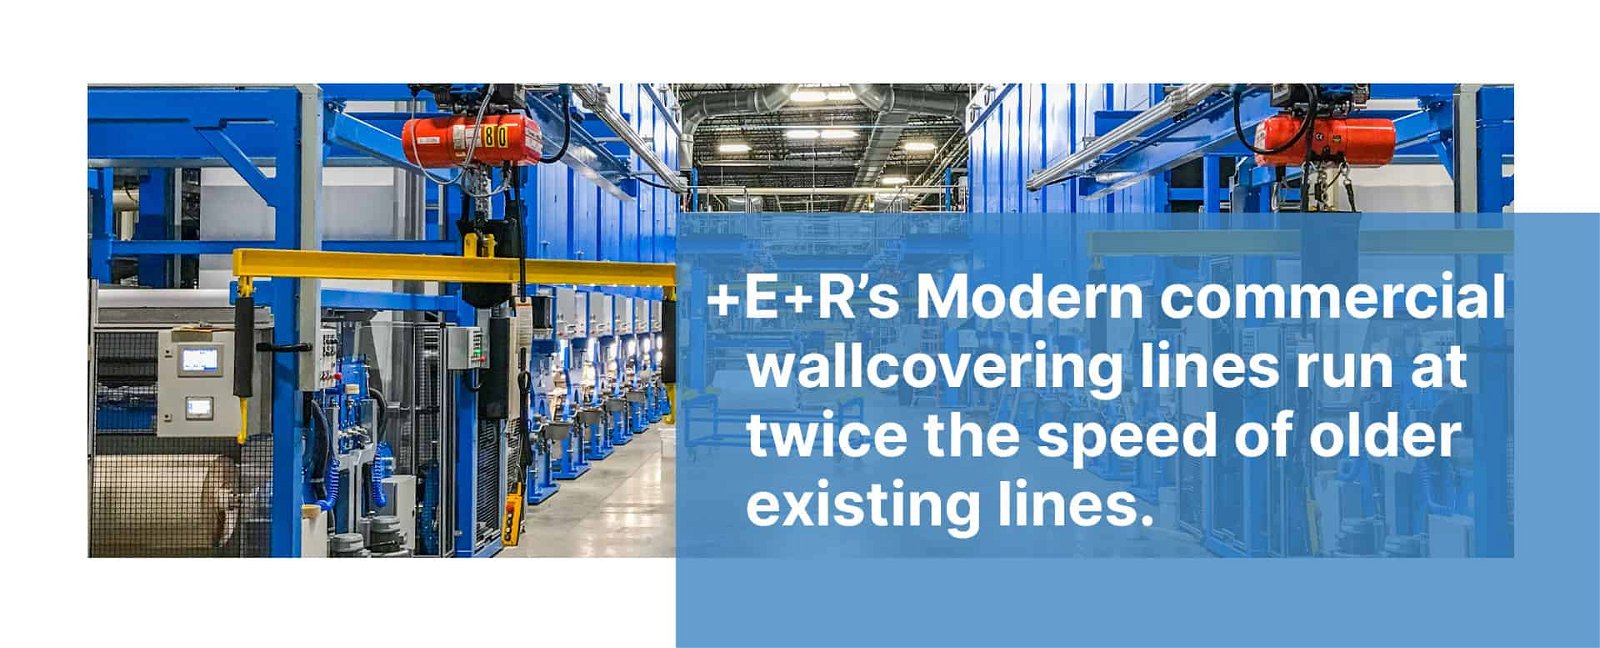 E+R’s Modern commercial wallcovering lines run at twice the speed of older existing lines.